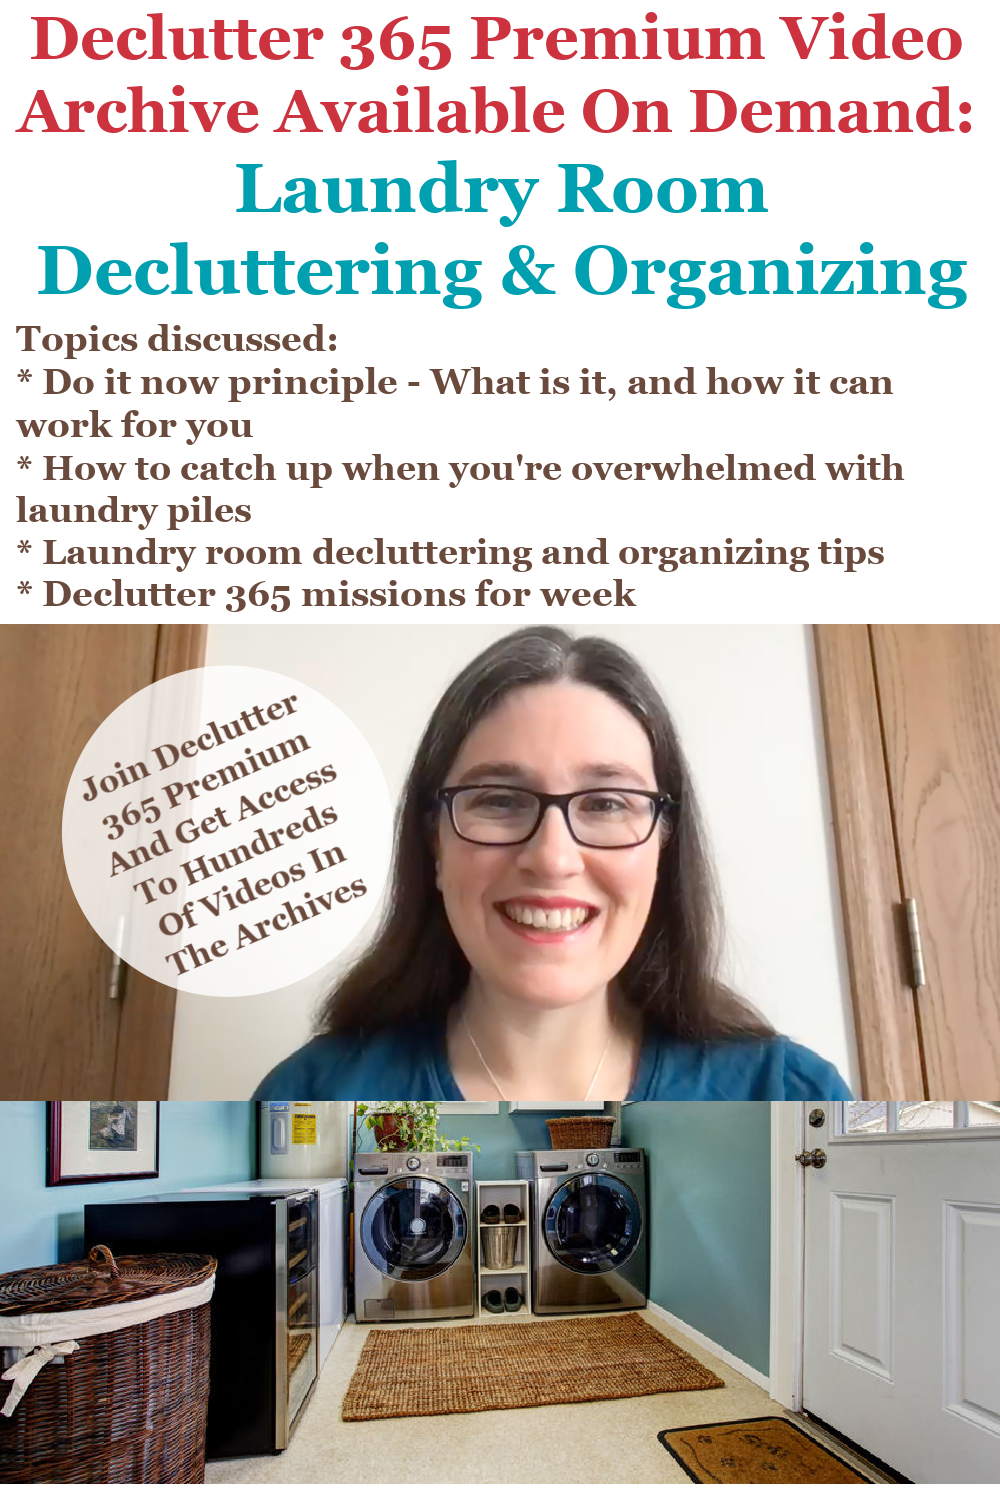 Declutter 365 Premium video archive available on demand all about decluttering and organizing your laundry room, on Home Storage Solutions 101